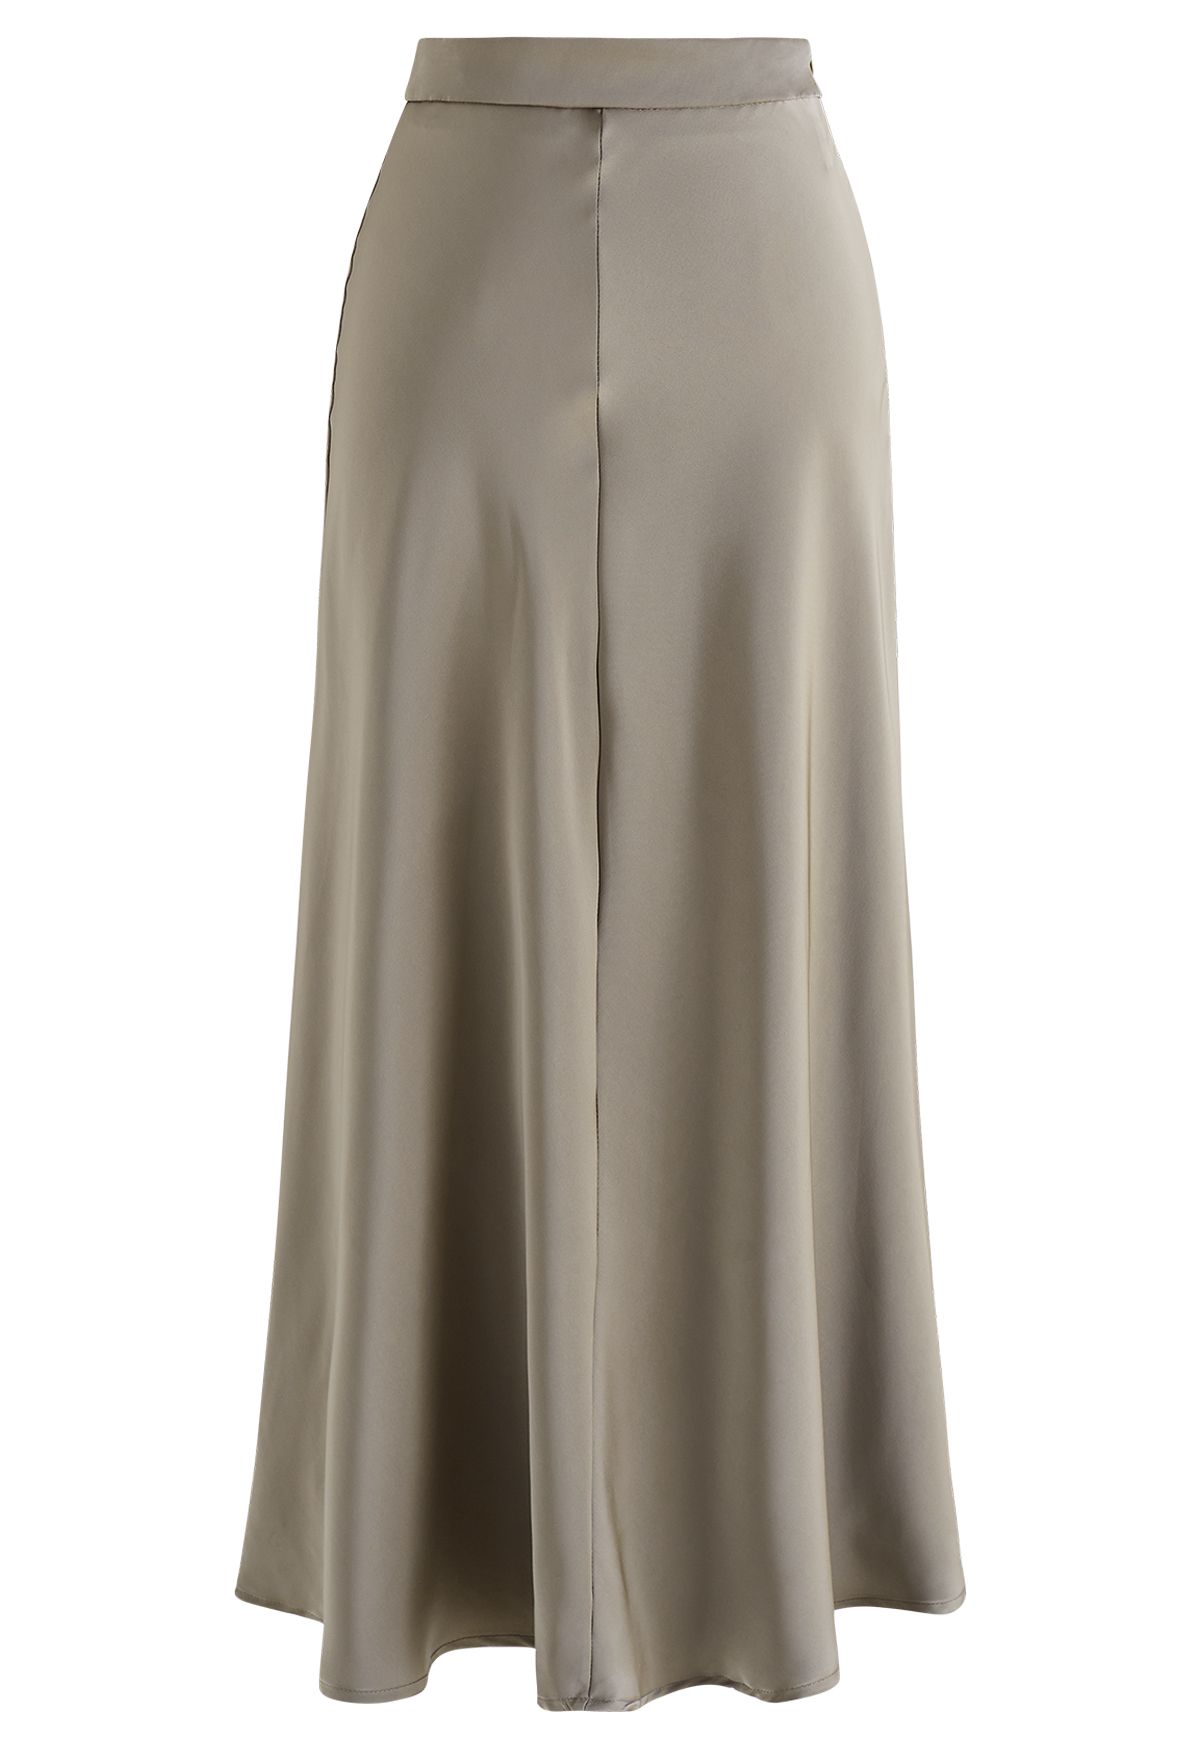 Middle Seam Smooth Satin Drape Maxi Skirt in Taupe